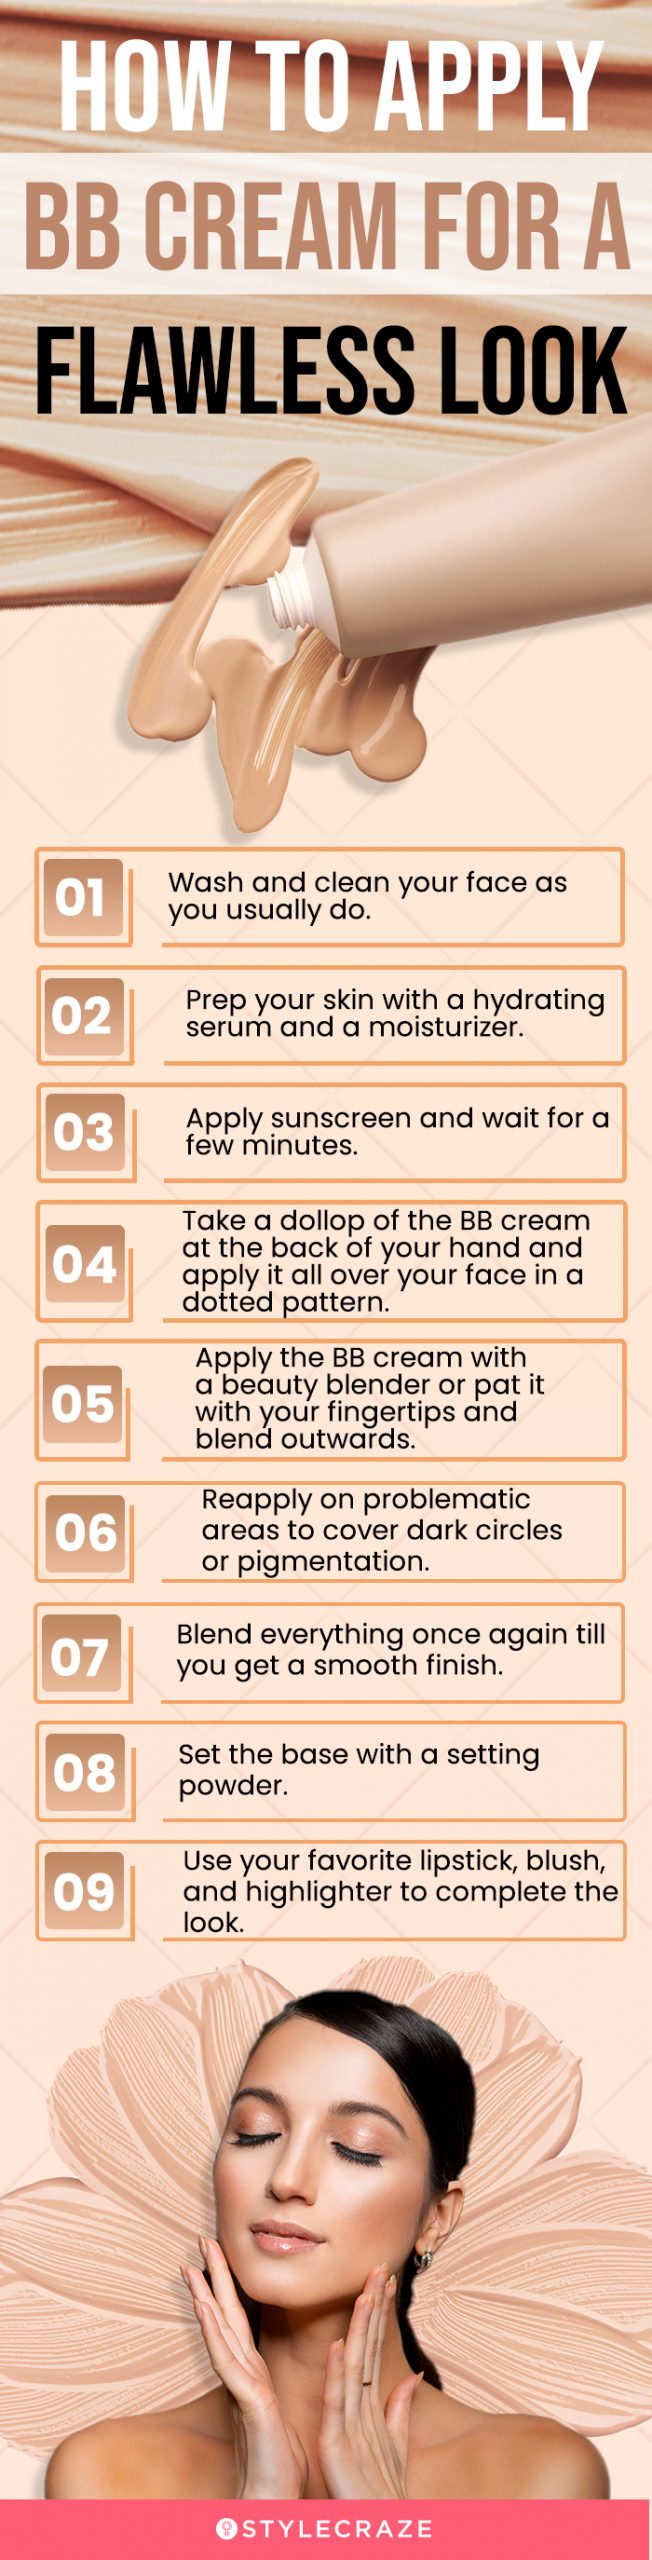 How To Apply BB Creams For A Flawless Look (infographic)